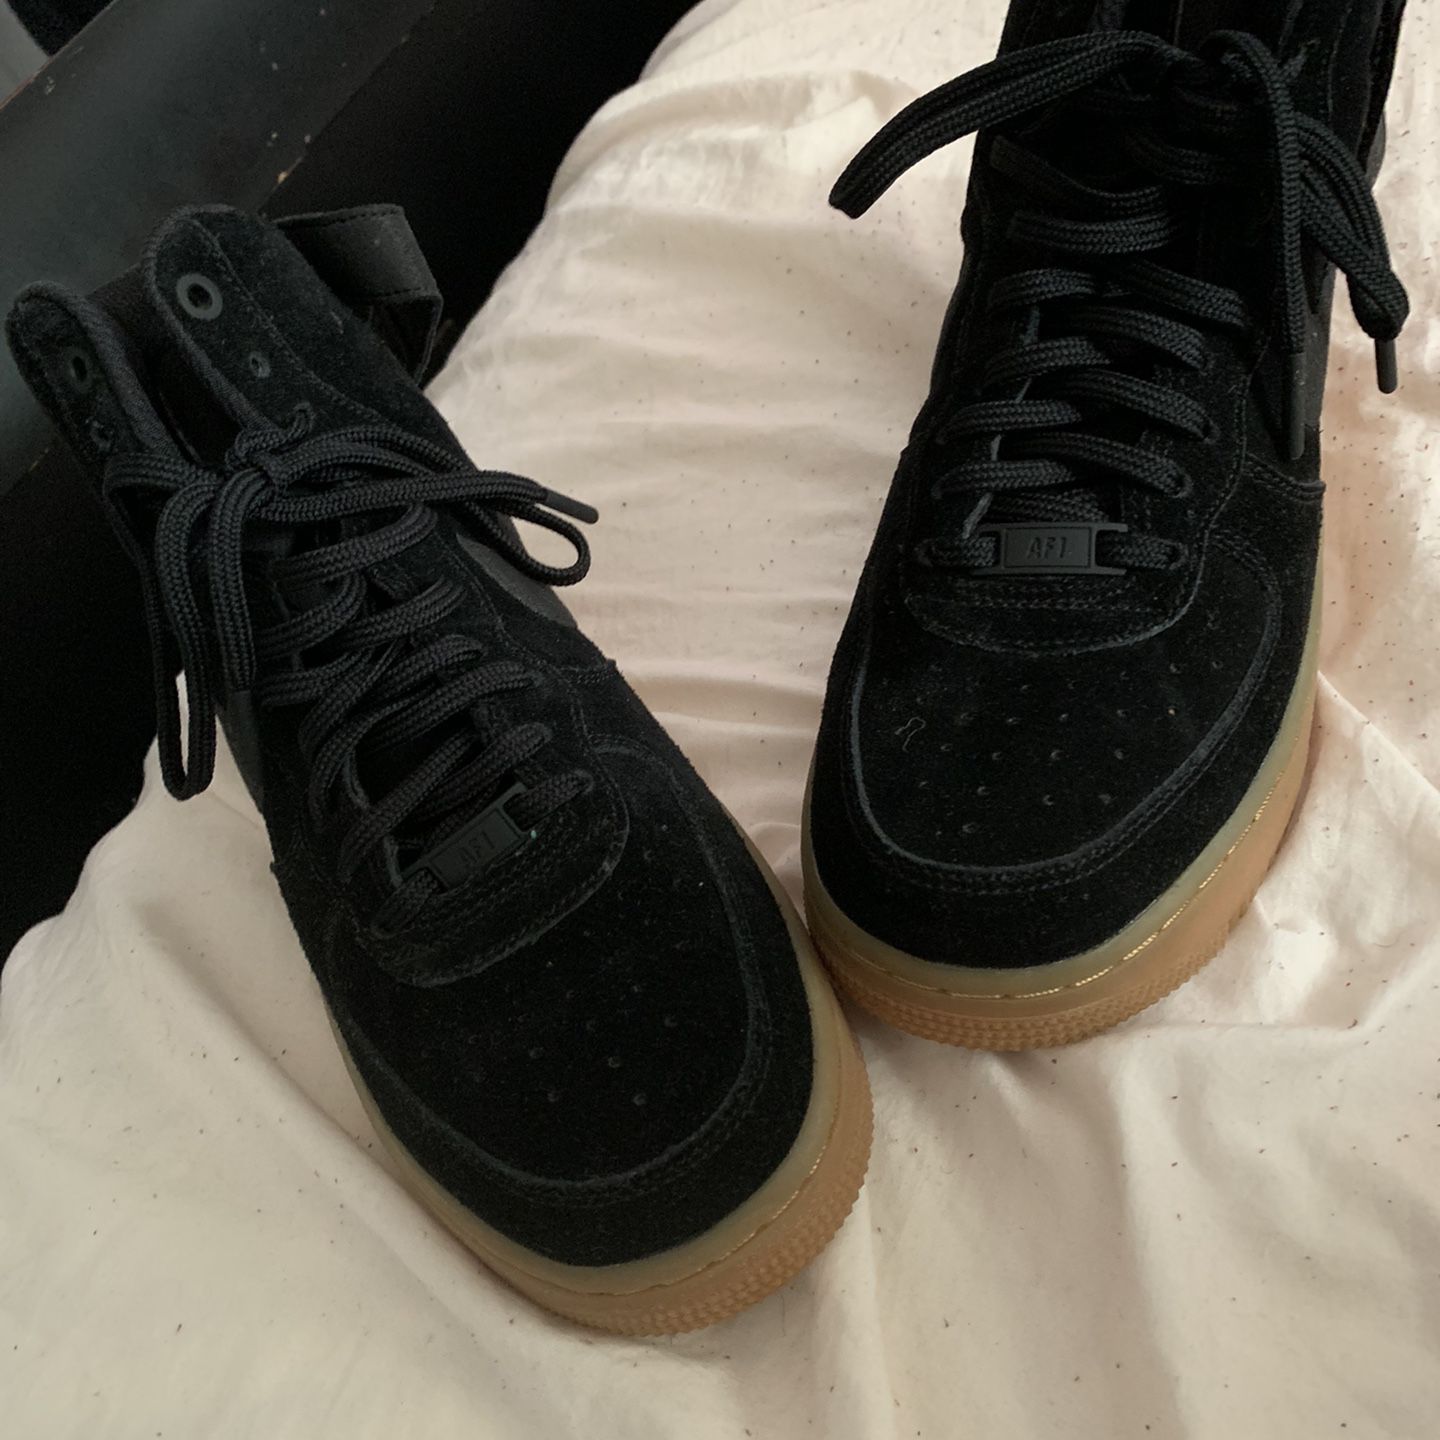 Af1 for Sale in Greensboro, NC - OfferUp